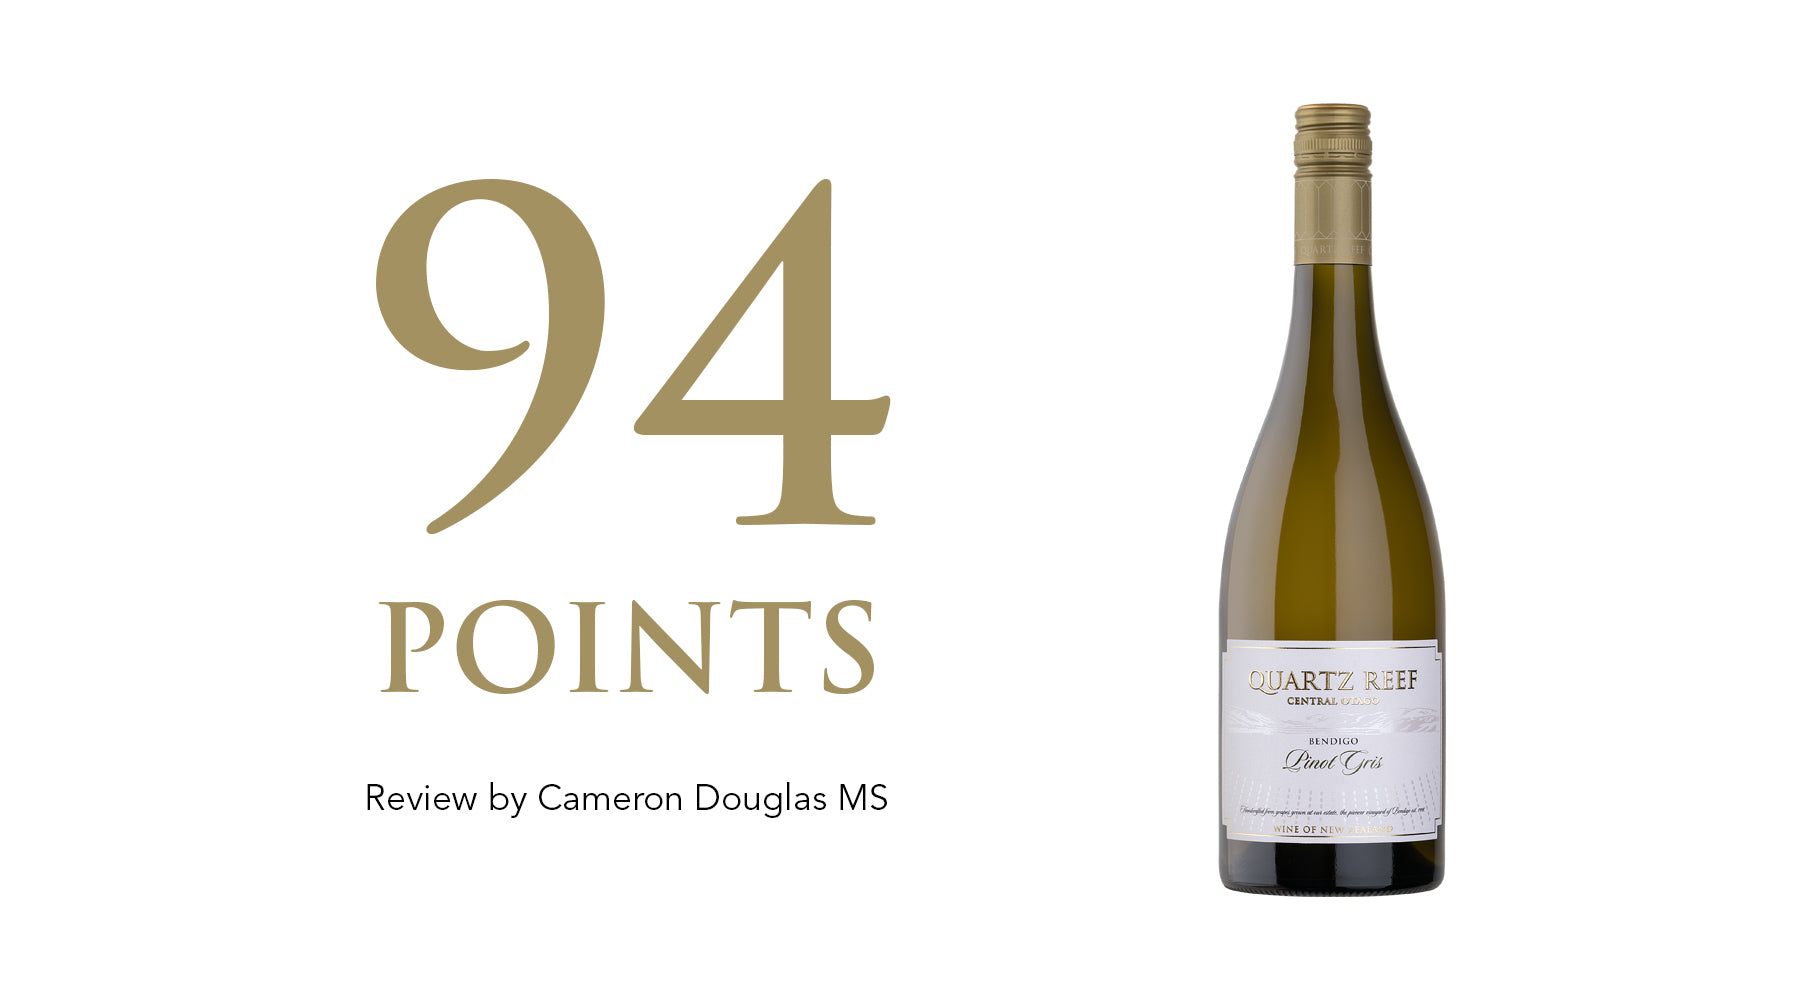 Pinot Gris 2021 - Awarded 94 Points